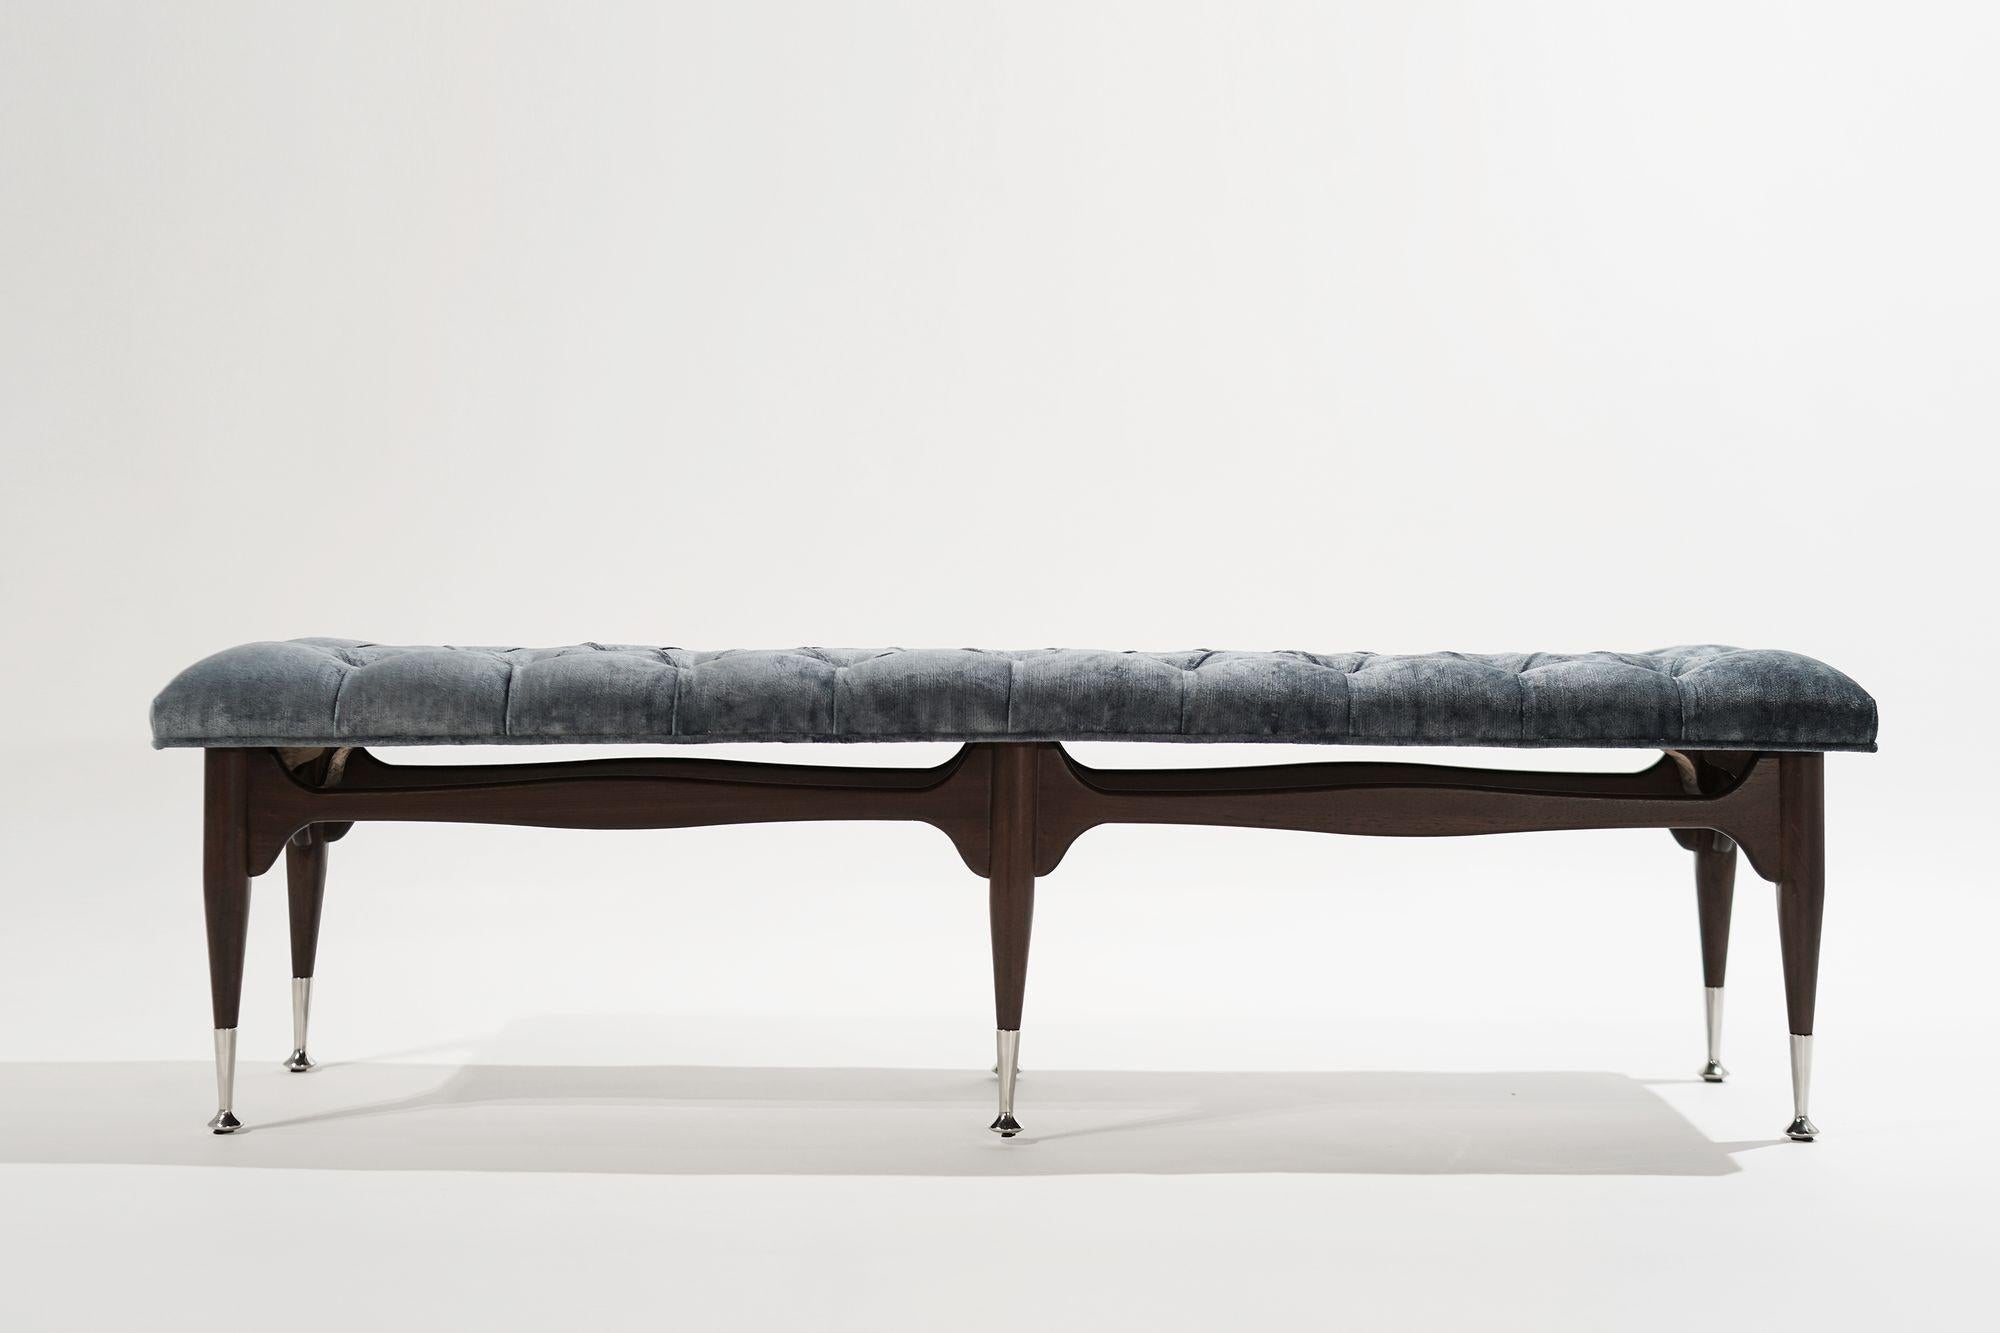 A original 1950s mid-century modern tufted bench, meticulously restored to its former glory by Stamford Modern. Crafted from solid mahogany, this timeless beauty boasts impeccable craftsmanship, complemented by nickel sabots and a sumptuous blue